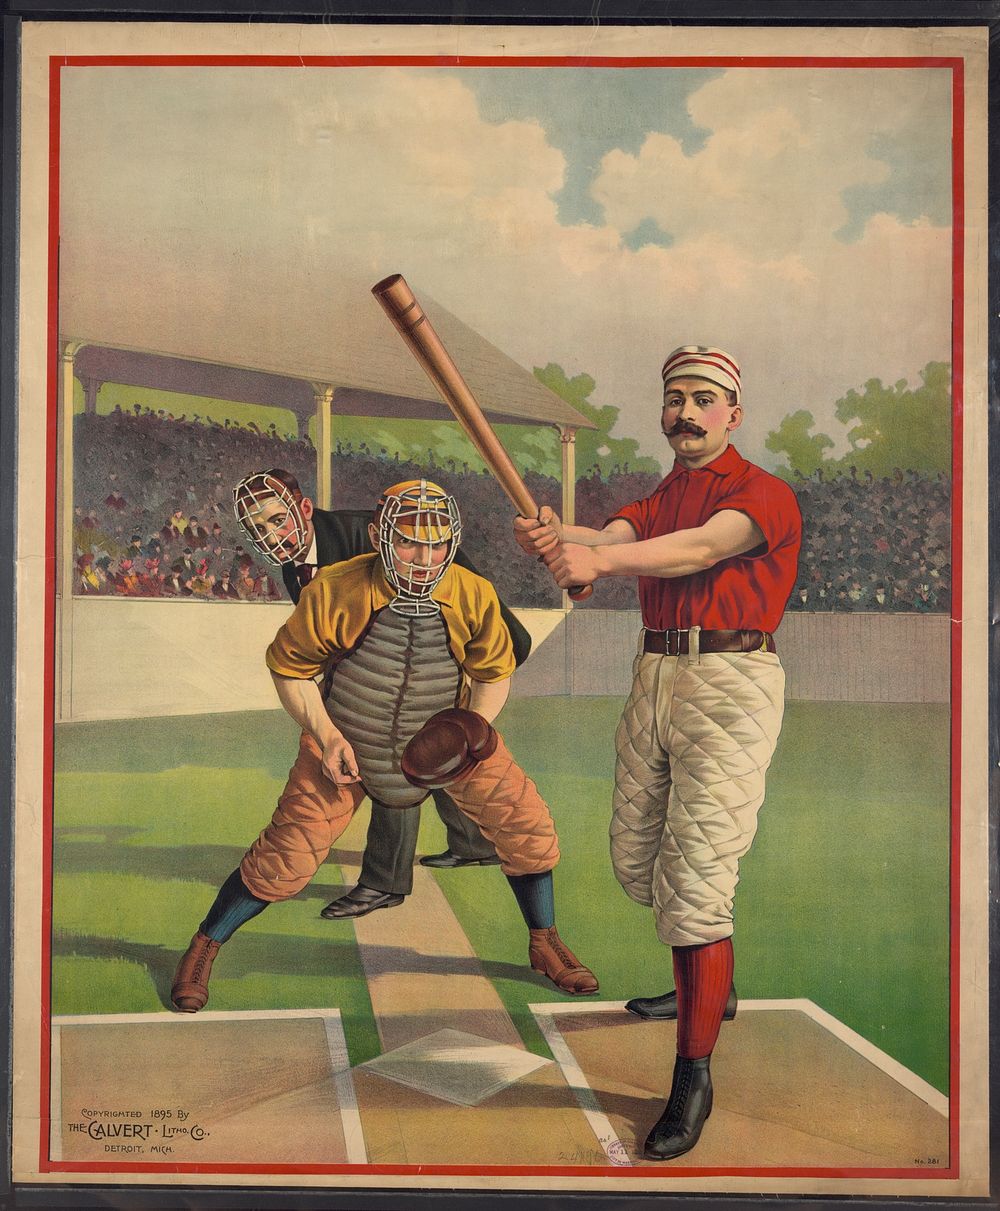 [Full sheet base ball poster no. 281], Calvert Lithographing Co. (Detroit, Mich.), copyright claimant